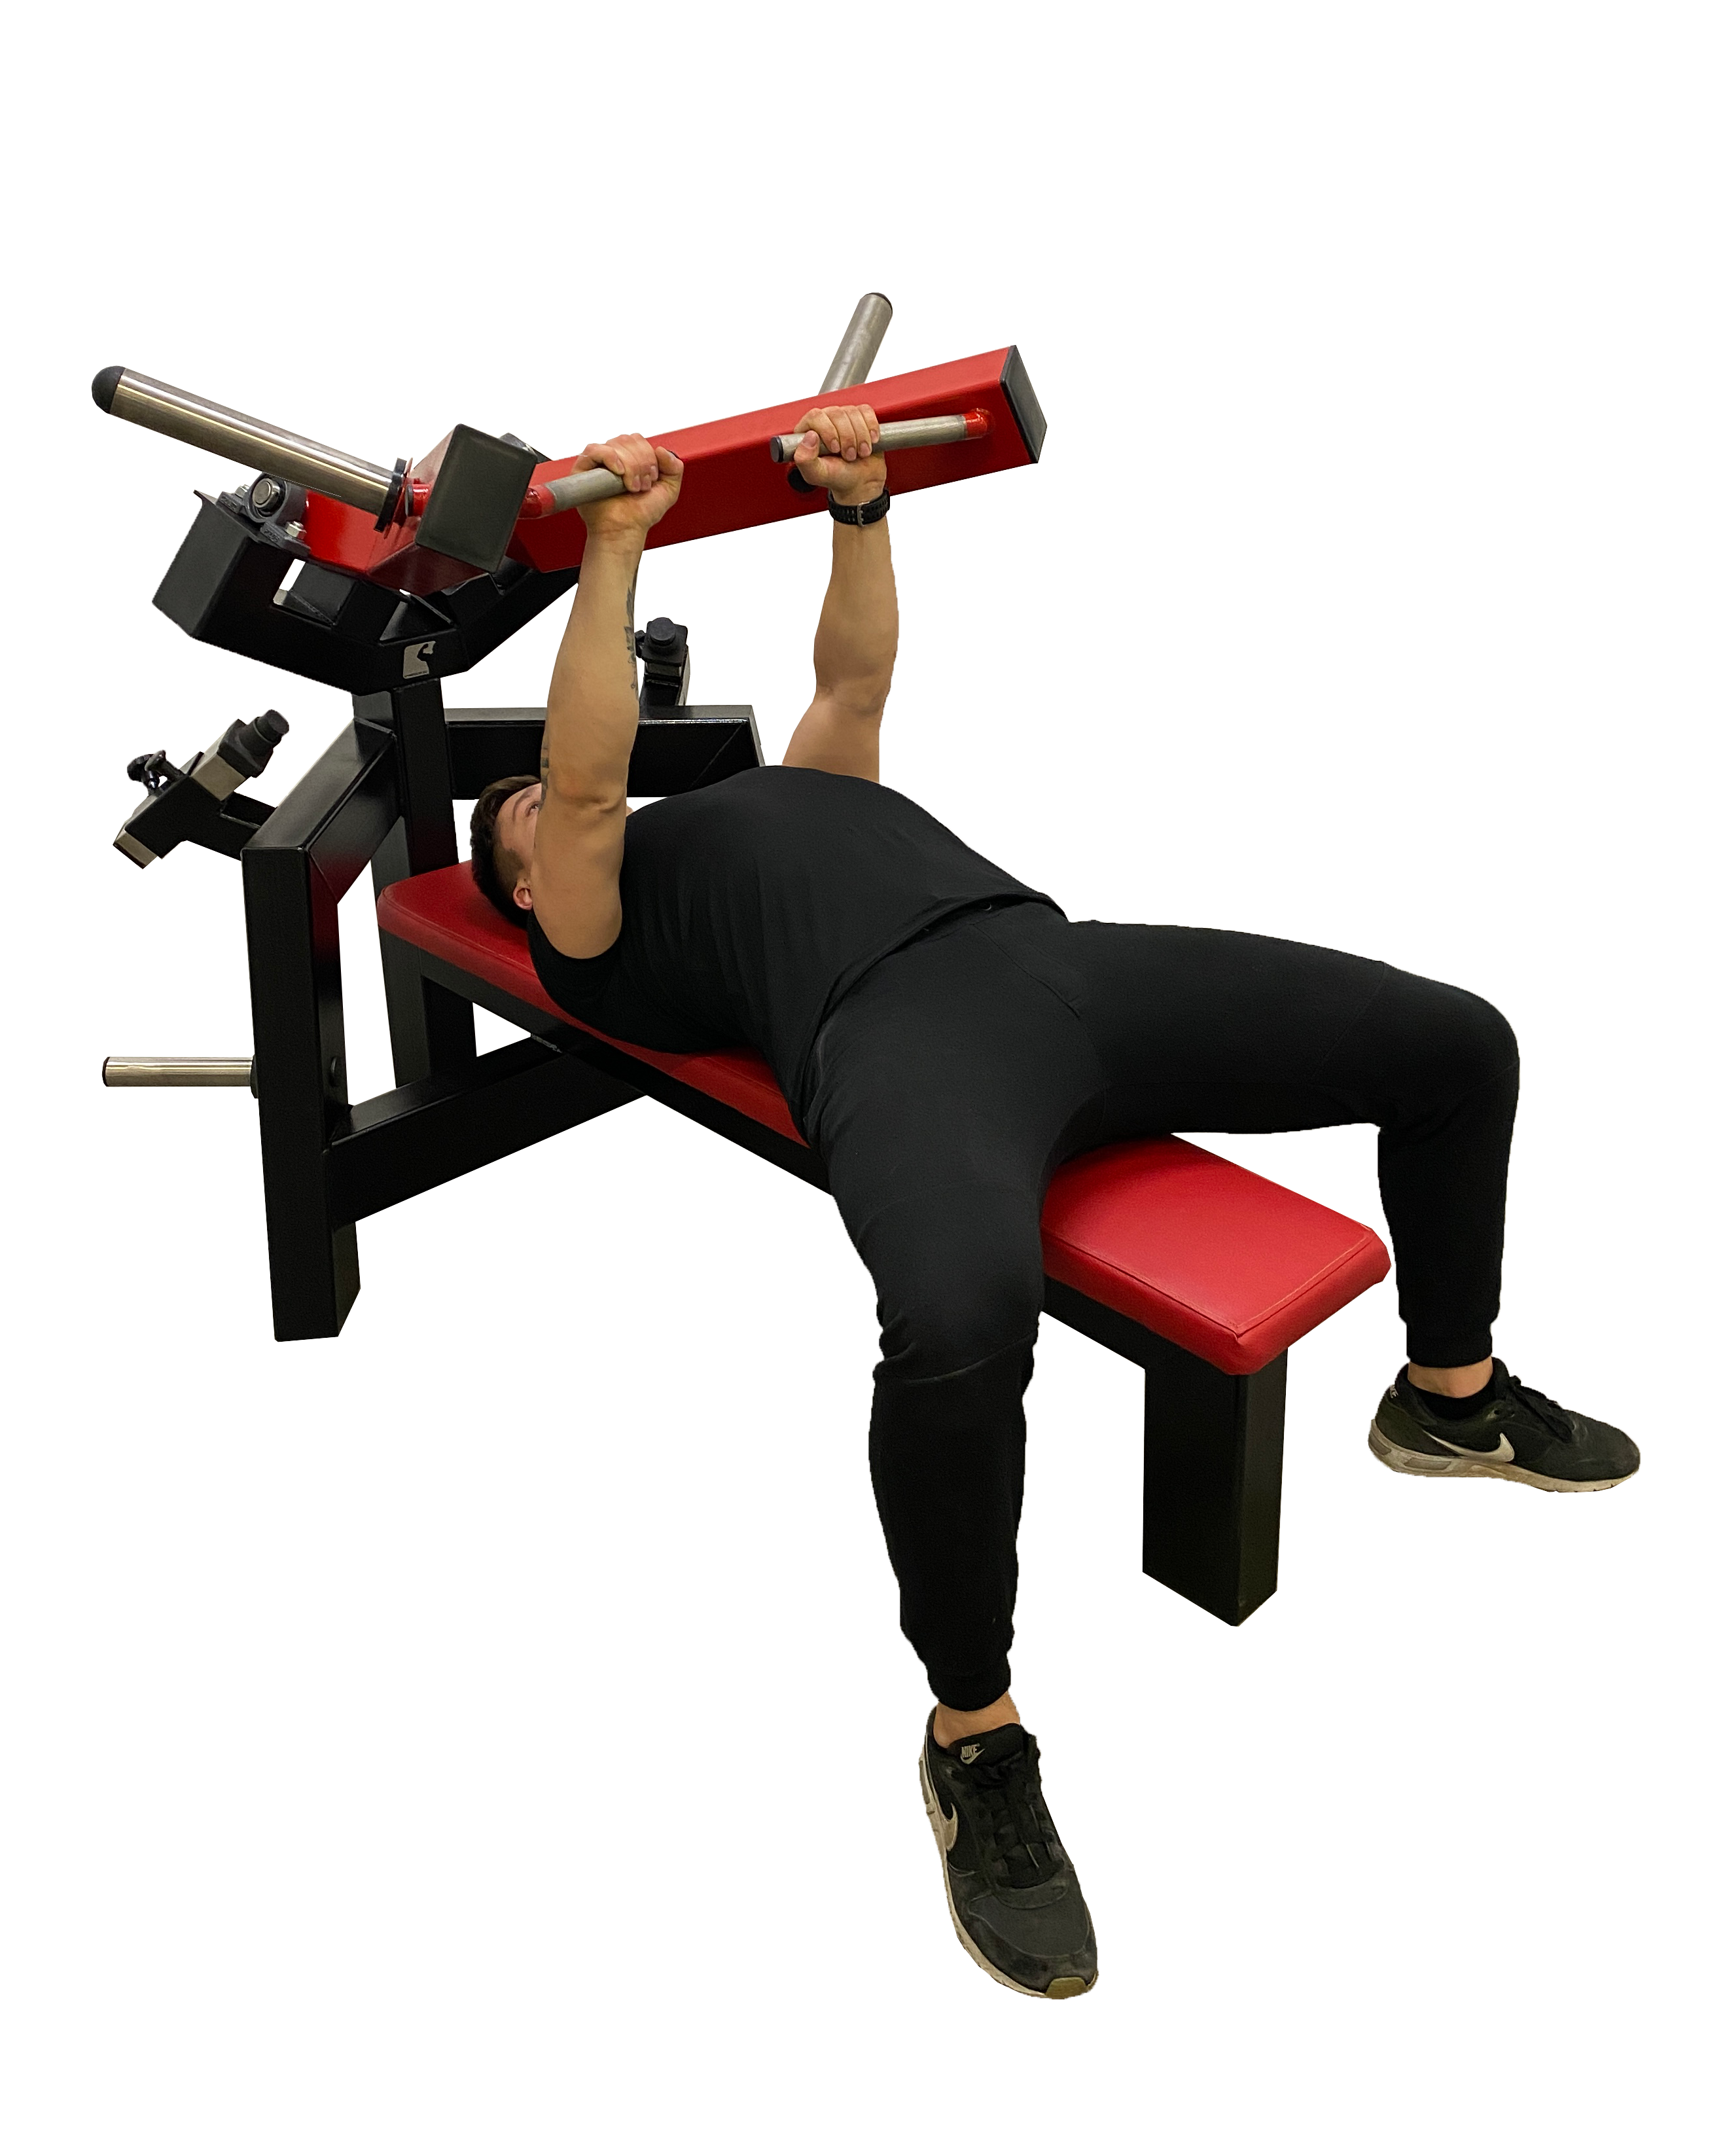 man using a plate loaded chest press machine